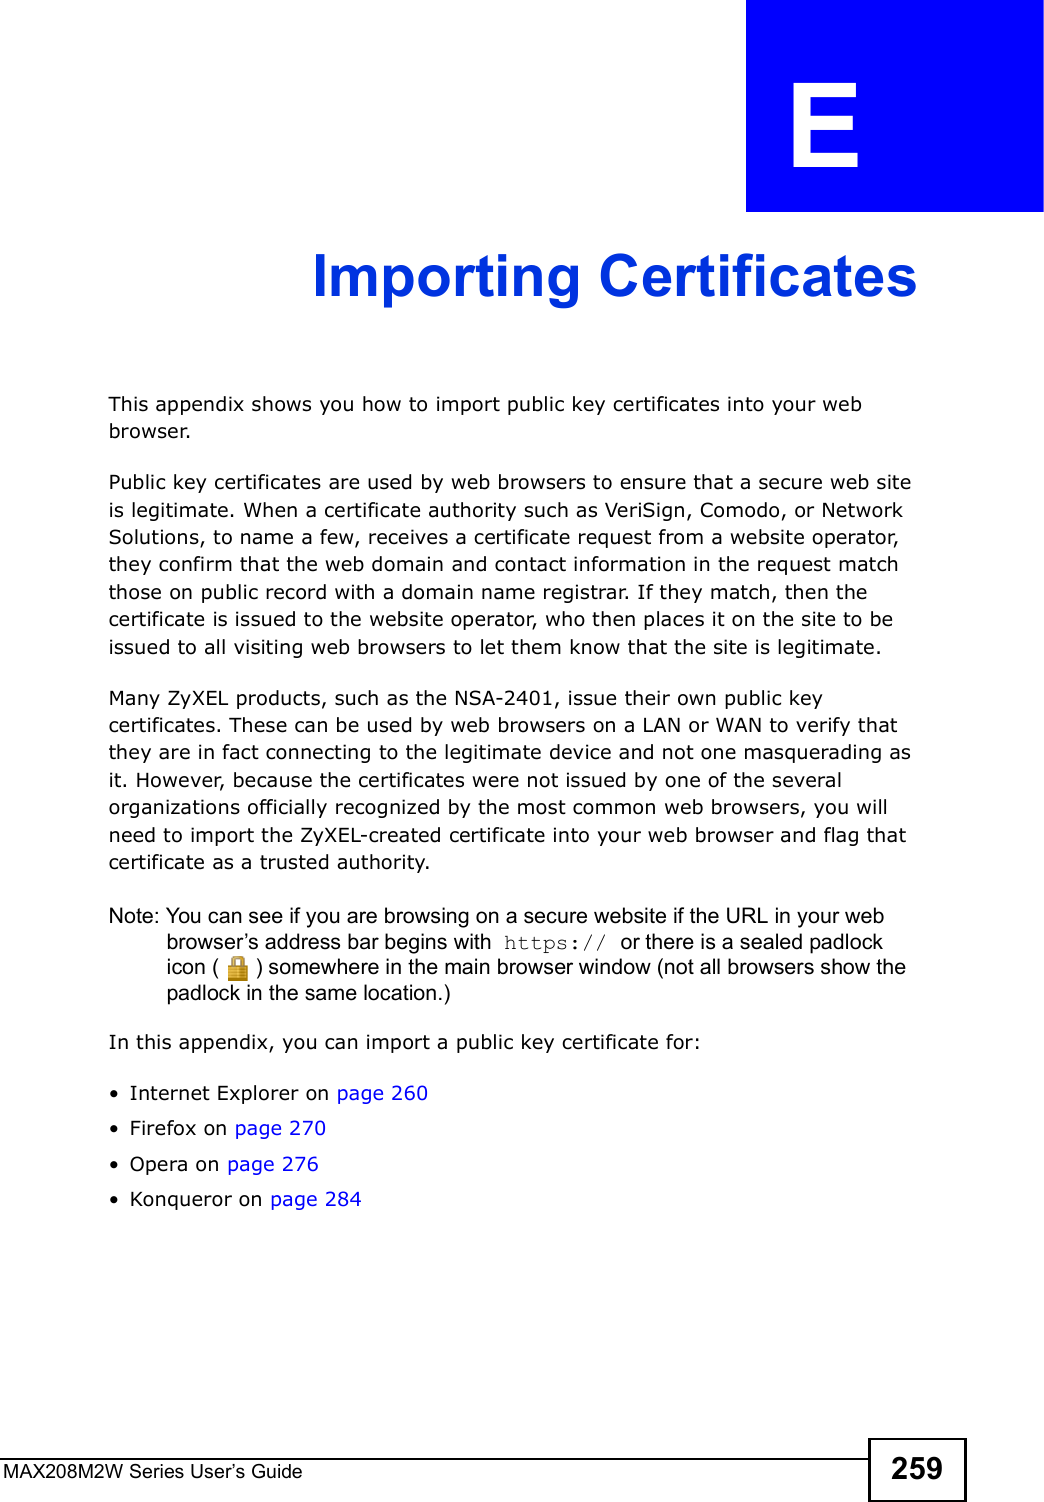 MAX208M2W Series User s Guide 259APPENDIX  E Importing CertificatesThis appendix shows you how to import public key certificates into your web browser. Public key certificates are used by web browsers to ensure that a secure web site is legitimate. When a certificate authority such as VeriSign, Comodo, or Network Solutions, to name a few, receives a certificate request from a website operator, they confirm that the web domain and contact information in the request match those on public record with a domain name registrar. If they match, then the certificate is issued to the website operator, who then places it on the site to be issued to all visiting web browsers to let them know that the site is legitimate.Many ZyXEL products, such as the NSA-2401, issue their own public key certificates. These can be used by web browsers on a LAN or WAN to verify that they are in fact connecting to the legitimate device and not one masquerading as it. However, because the certificates were not issued by one of the several organizations officially recognized by the most common web browsers, you will need to import the ZyXEL-created certificate into your web browser and flag that certificate as a trusted authority.Note: You can see if you are browsing on a secure website if the URL in your web browser s address bar begins with  https:// or there is a sealed padlock icon () somewhere in the main browser window (not all browsers show the padlock in the same location.)In this appendix, you can import a public key certificate for:!Internet Explorer on page 260!Firefox on page 270!Opera on page 276!Konqueror on page 284